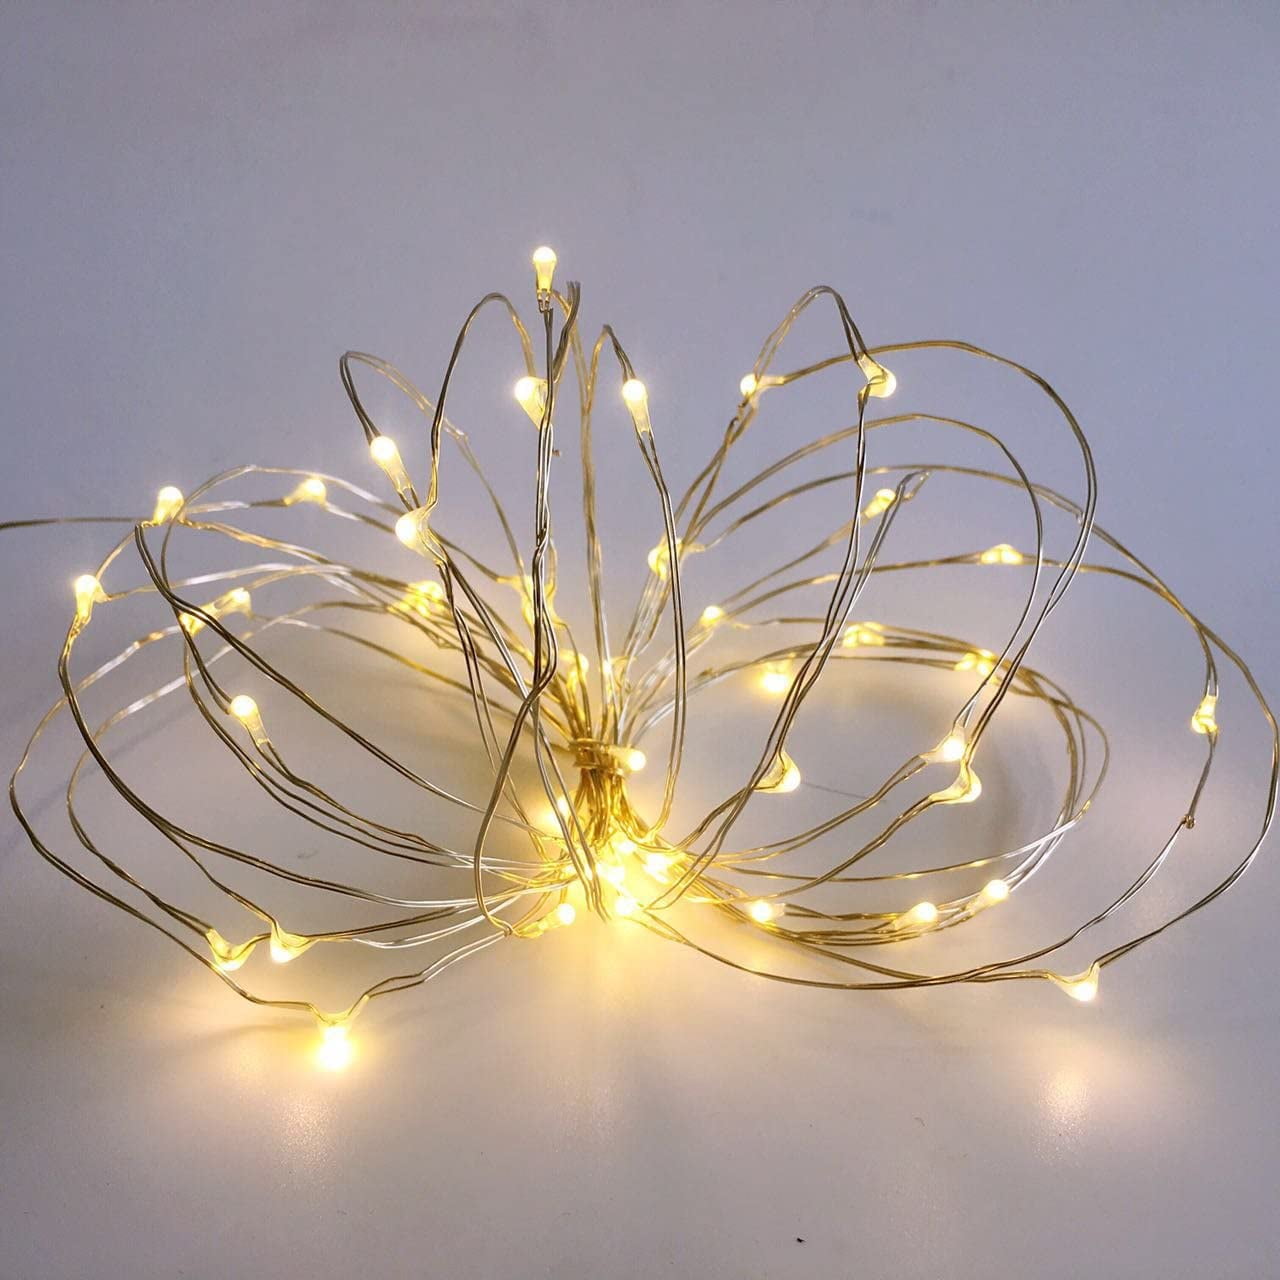 40 50 100 LED MICRO WIRE STRING FAIRY PARTY XMAS WEDDING CHRISTMAS LIGHT 